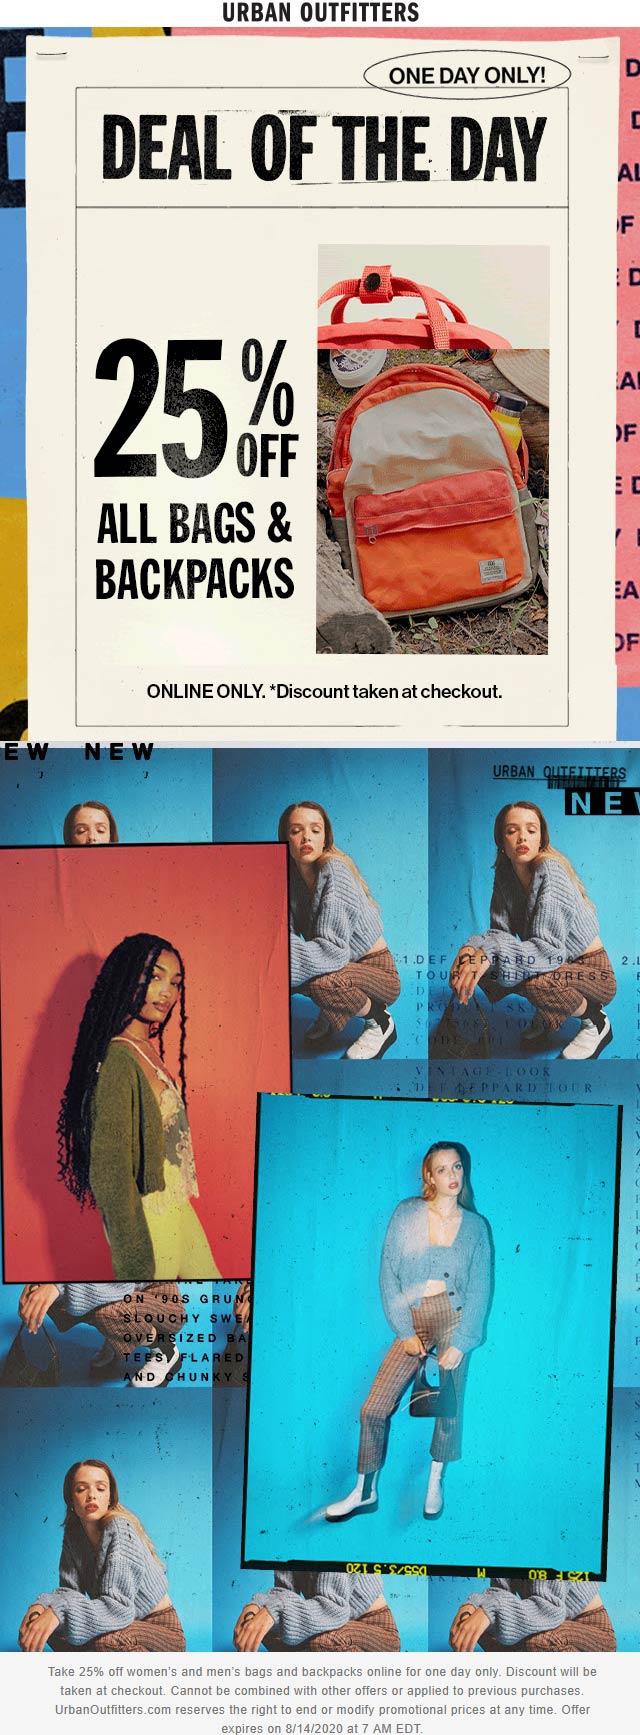 Urban Outfitters stores Coupon  25% off bags & backpacks today at Urban Outfitters #urbanoutfitters 